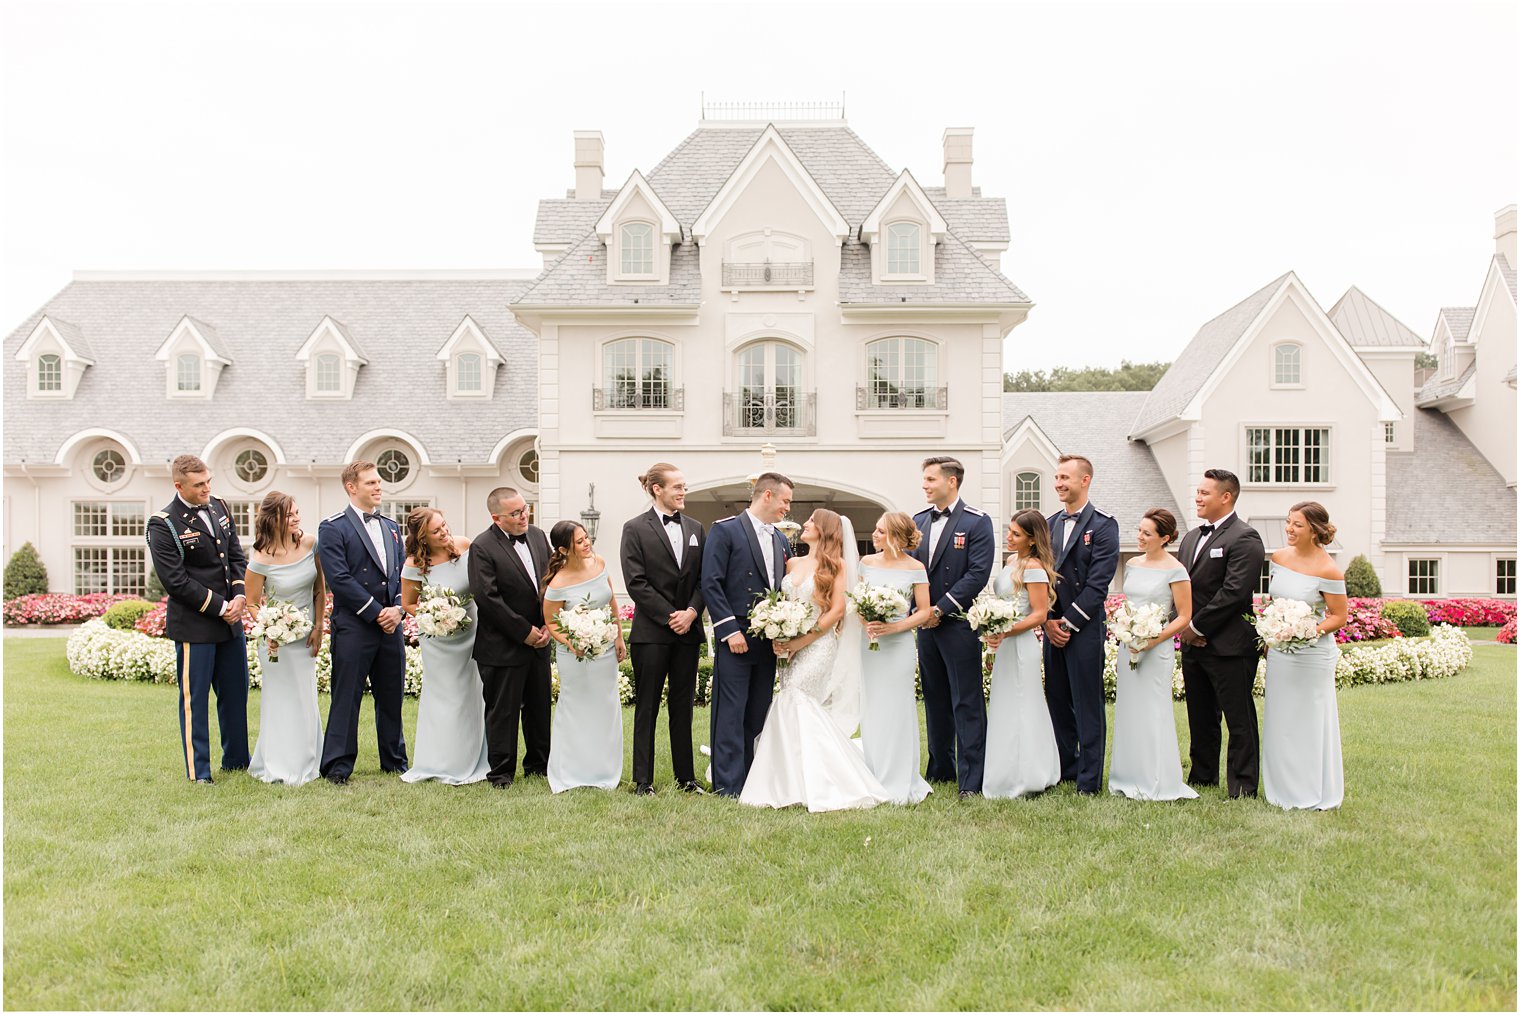 newlyweds look at each other with wedding party beside them on lawn